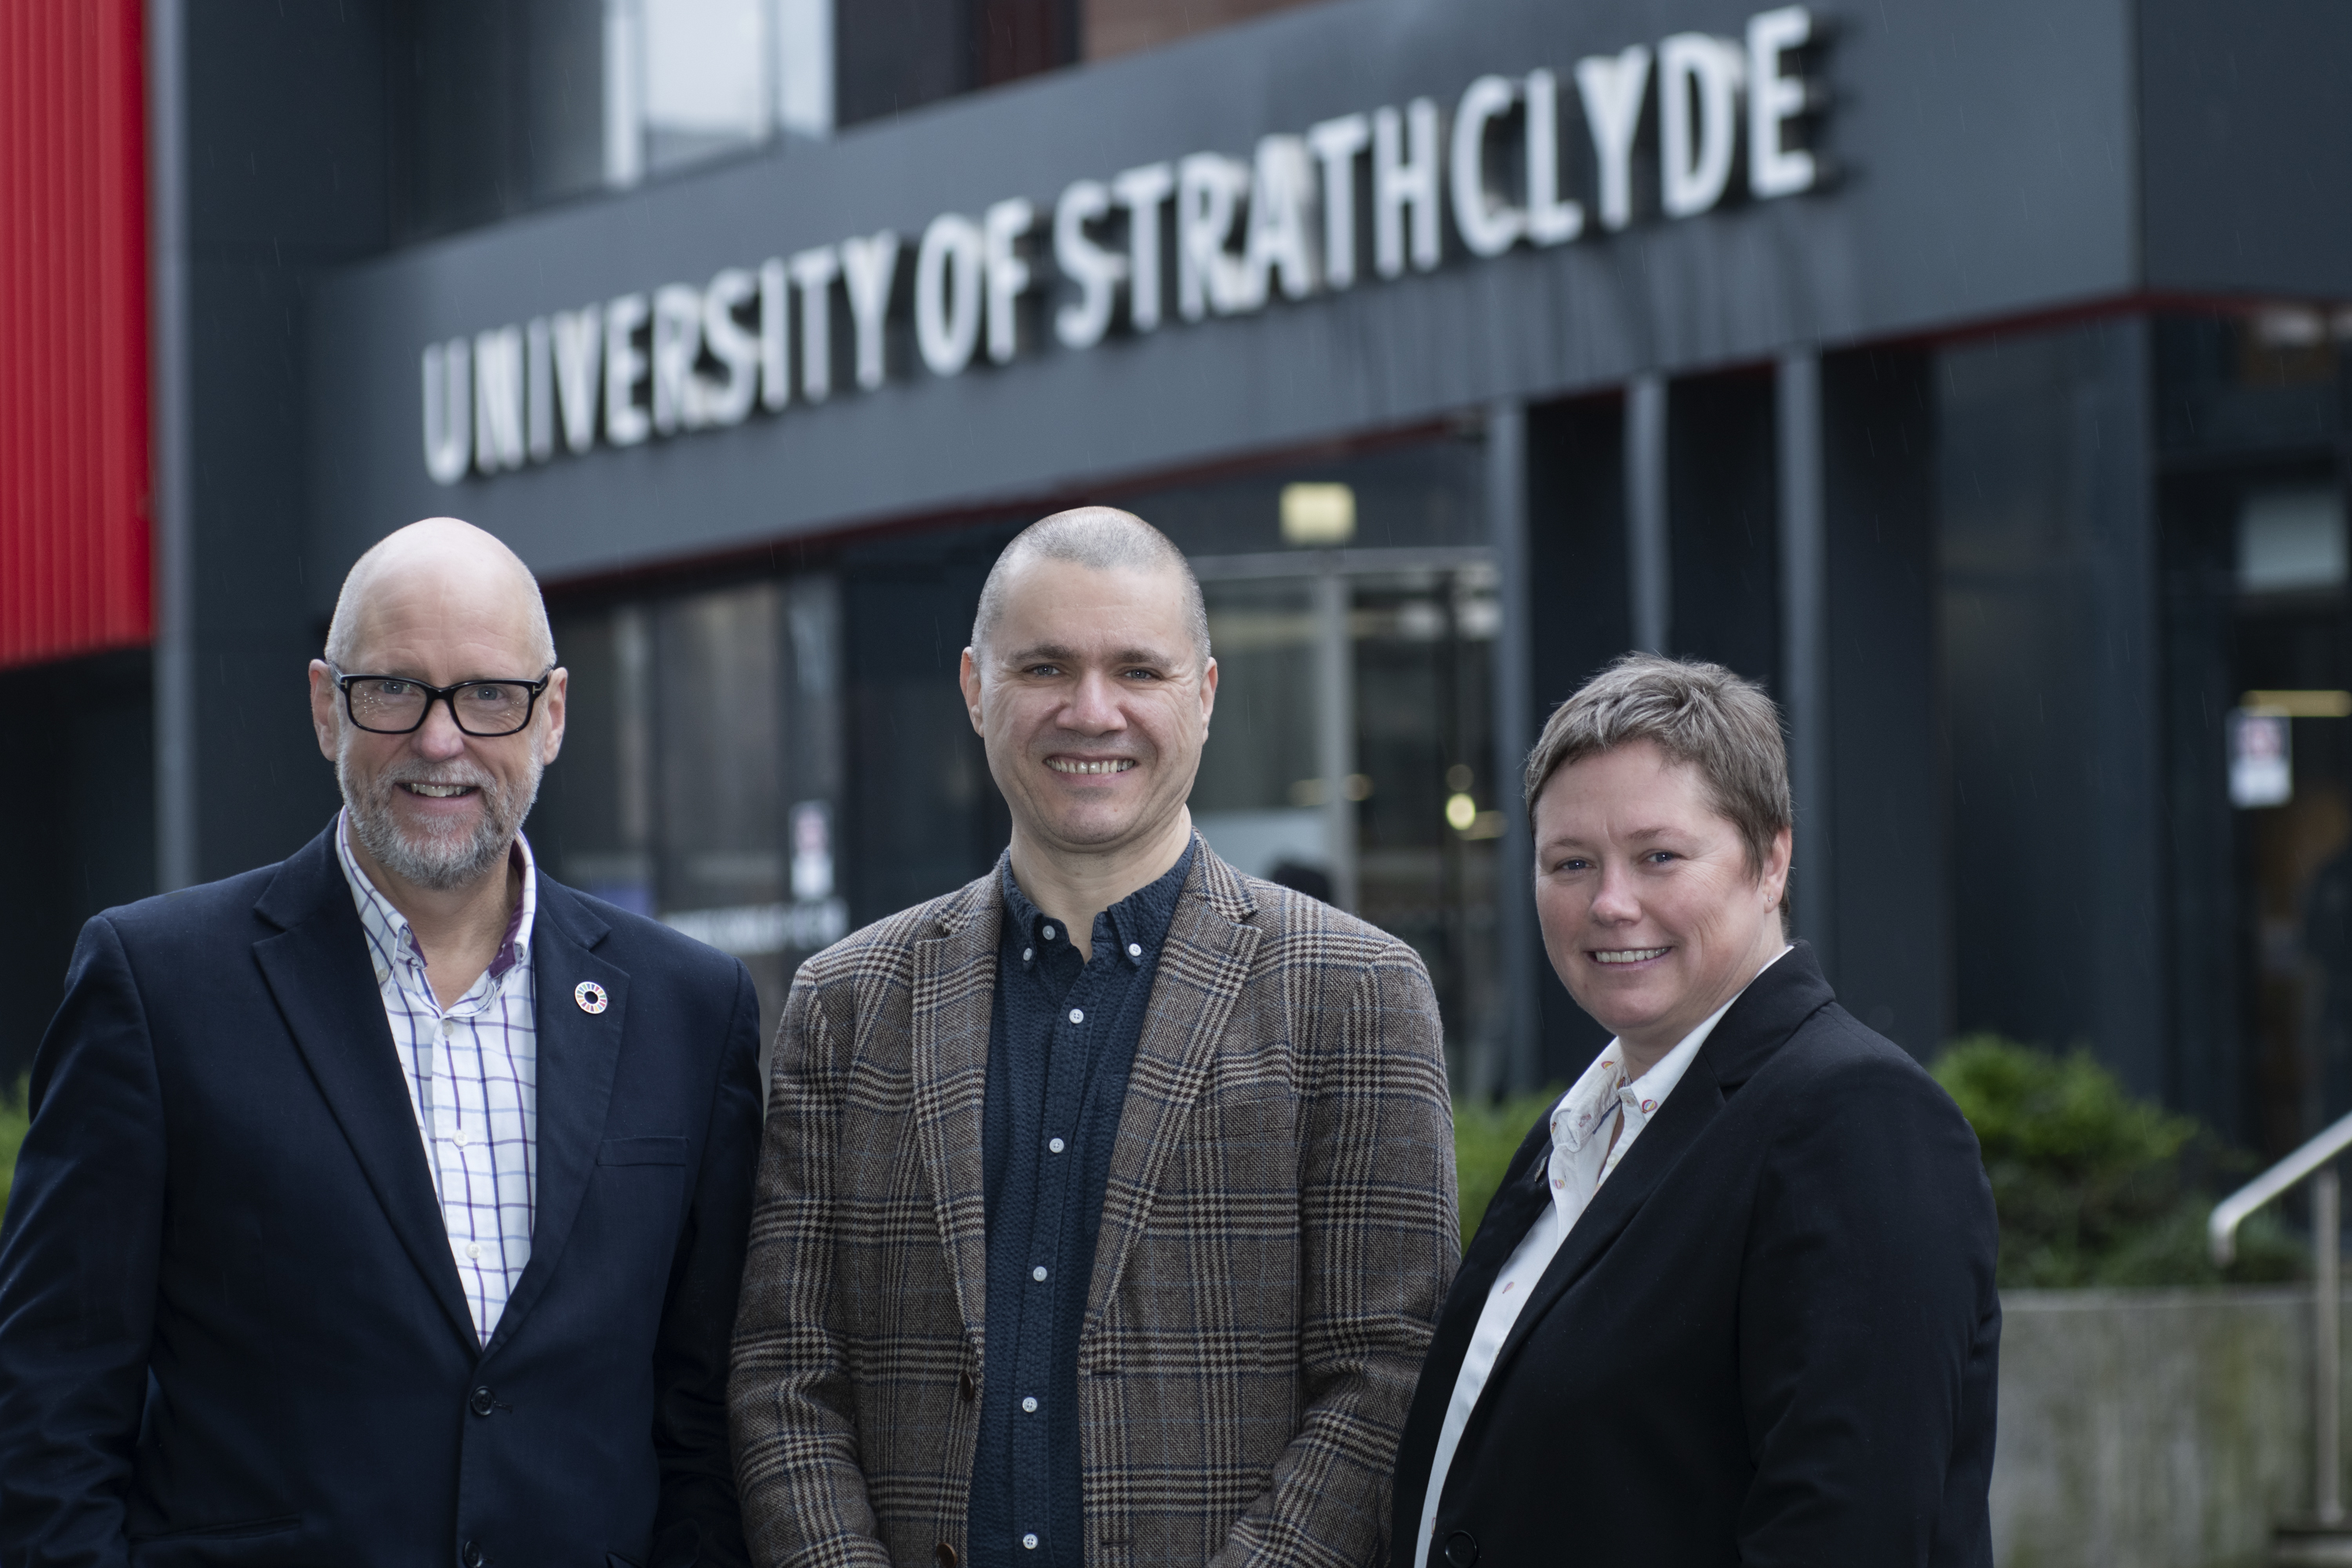 John Anderson, Director of Growth Programmes, Hunter Centre for Entrepreneurship Gillian Docherty, Chief Commercial Officer at the University of Strathclyde David Ritchie, Exec Director of Partnerships & Engagement at the Scottish National Investment Bank